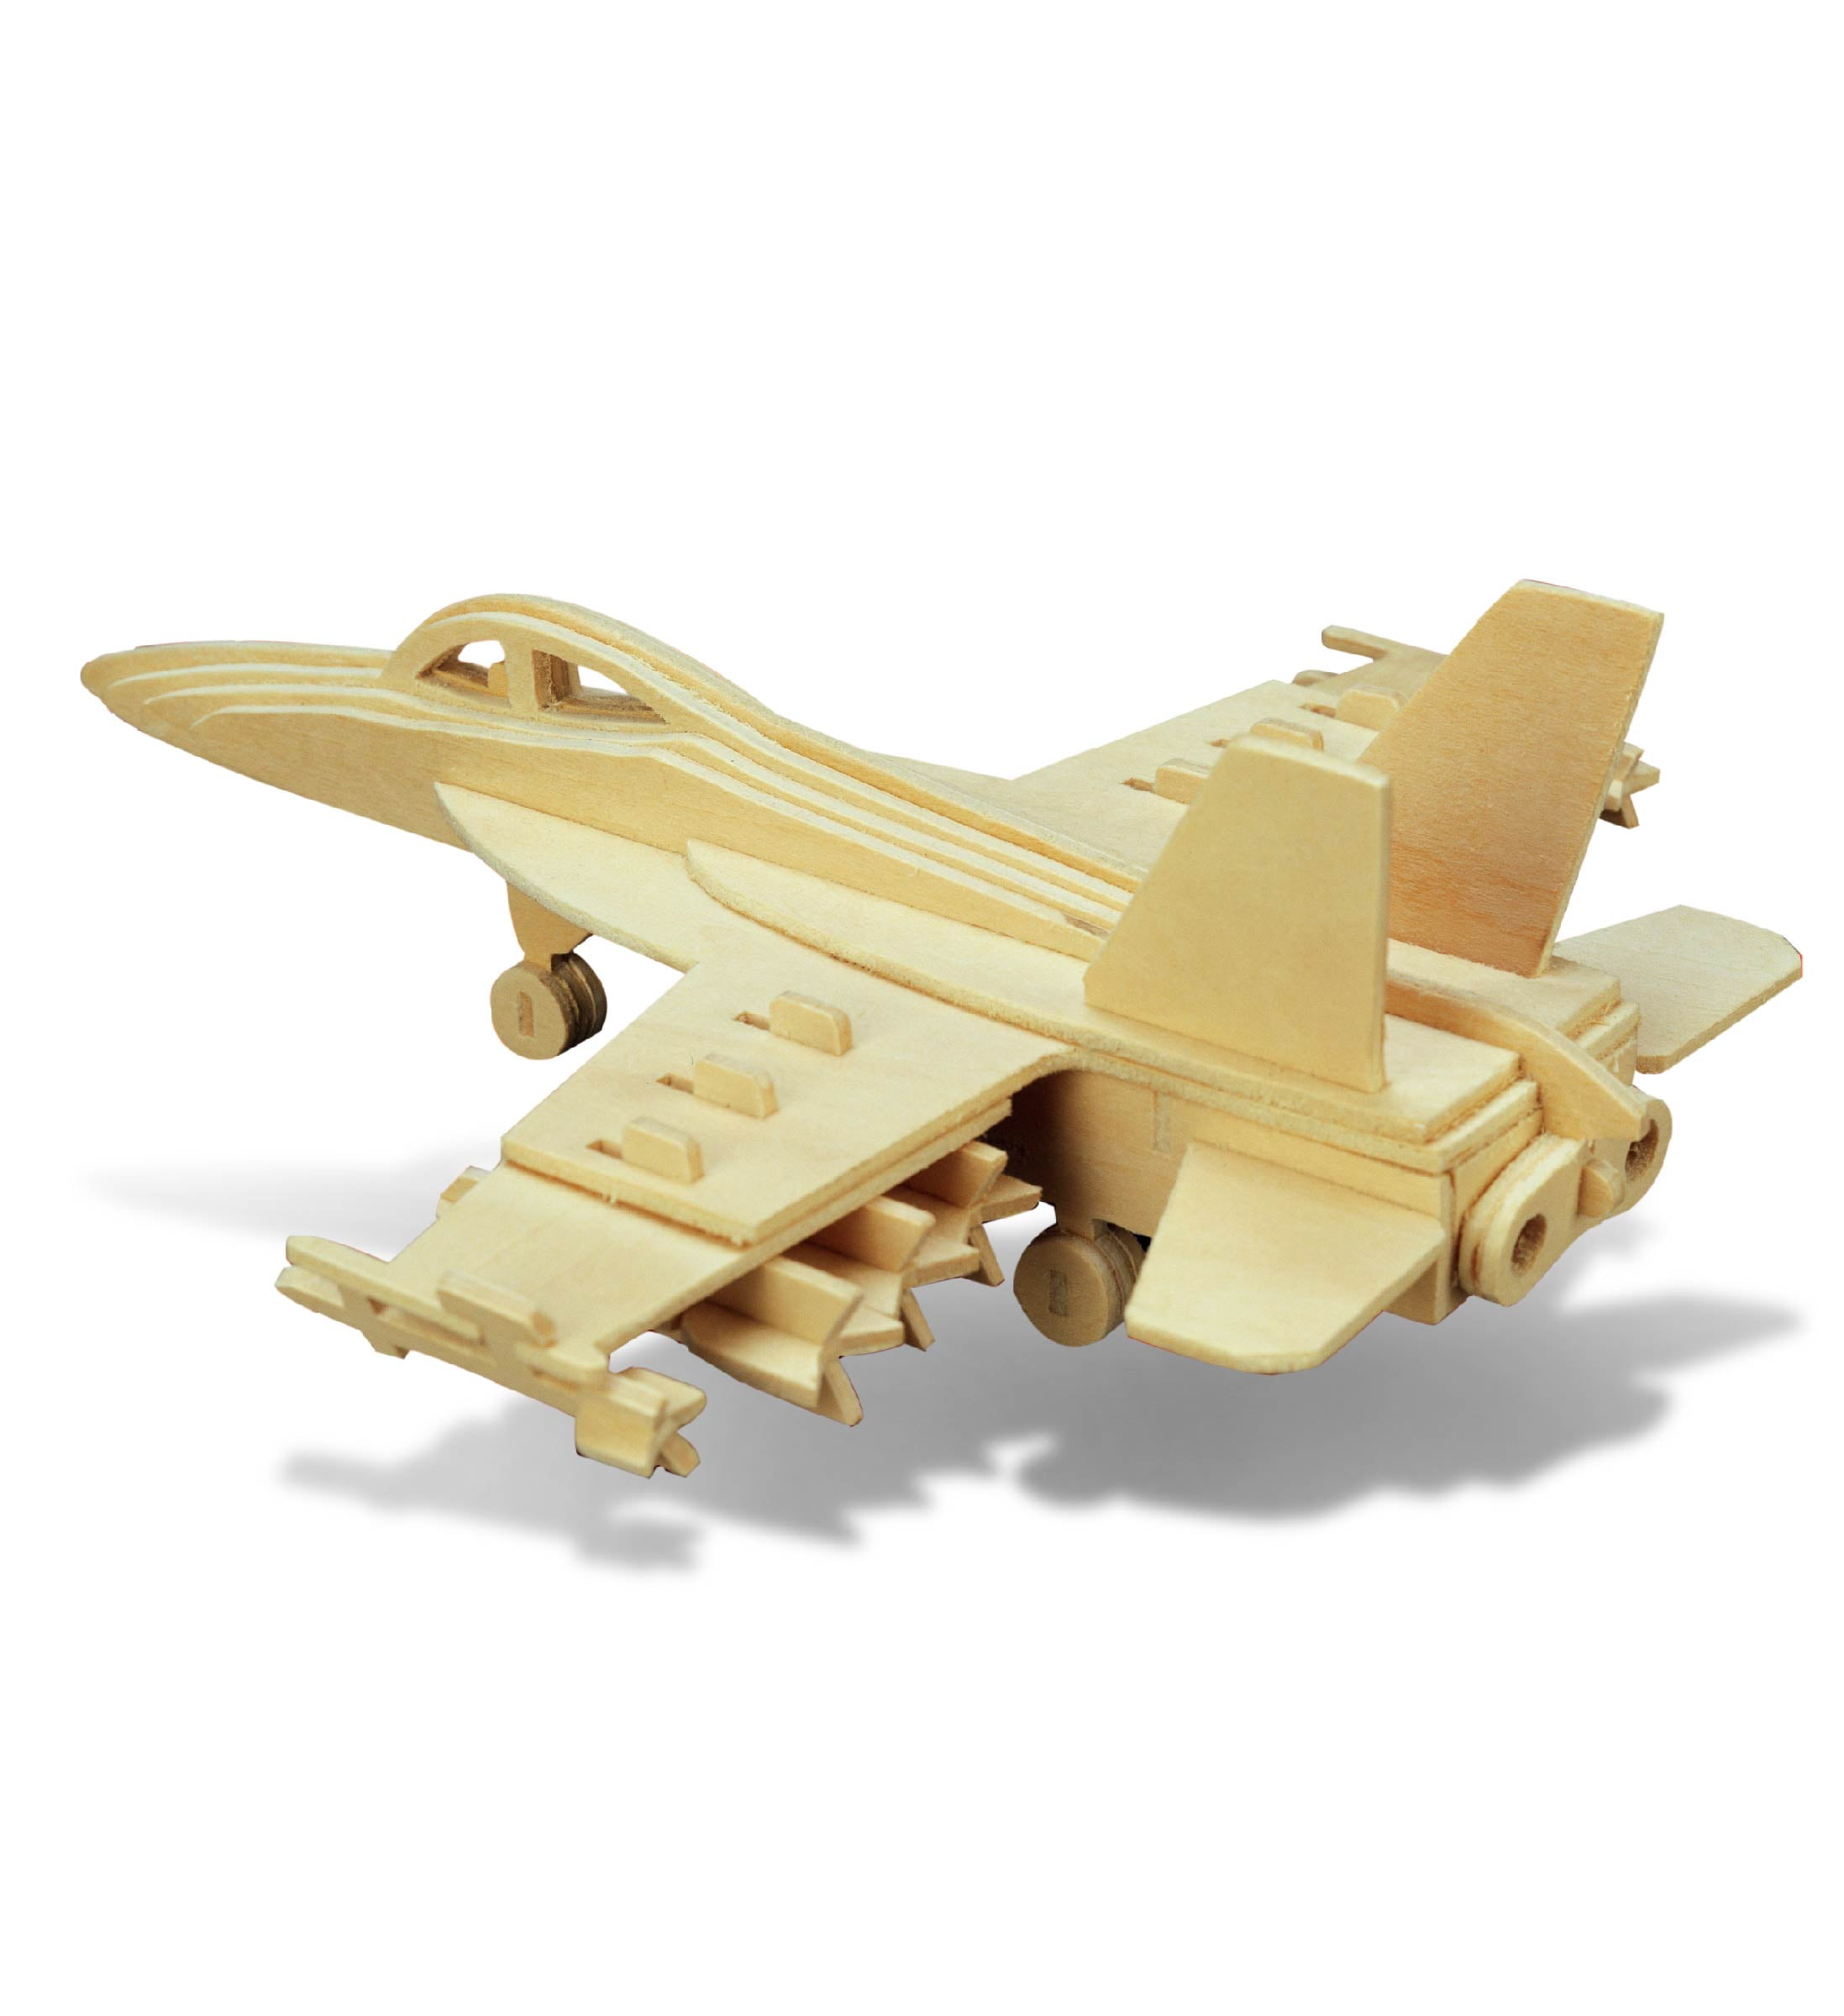 Military Fighter Aircraft DIY Assembly Children Fun Christmas Toy Free Shipping